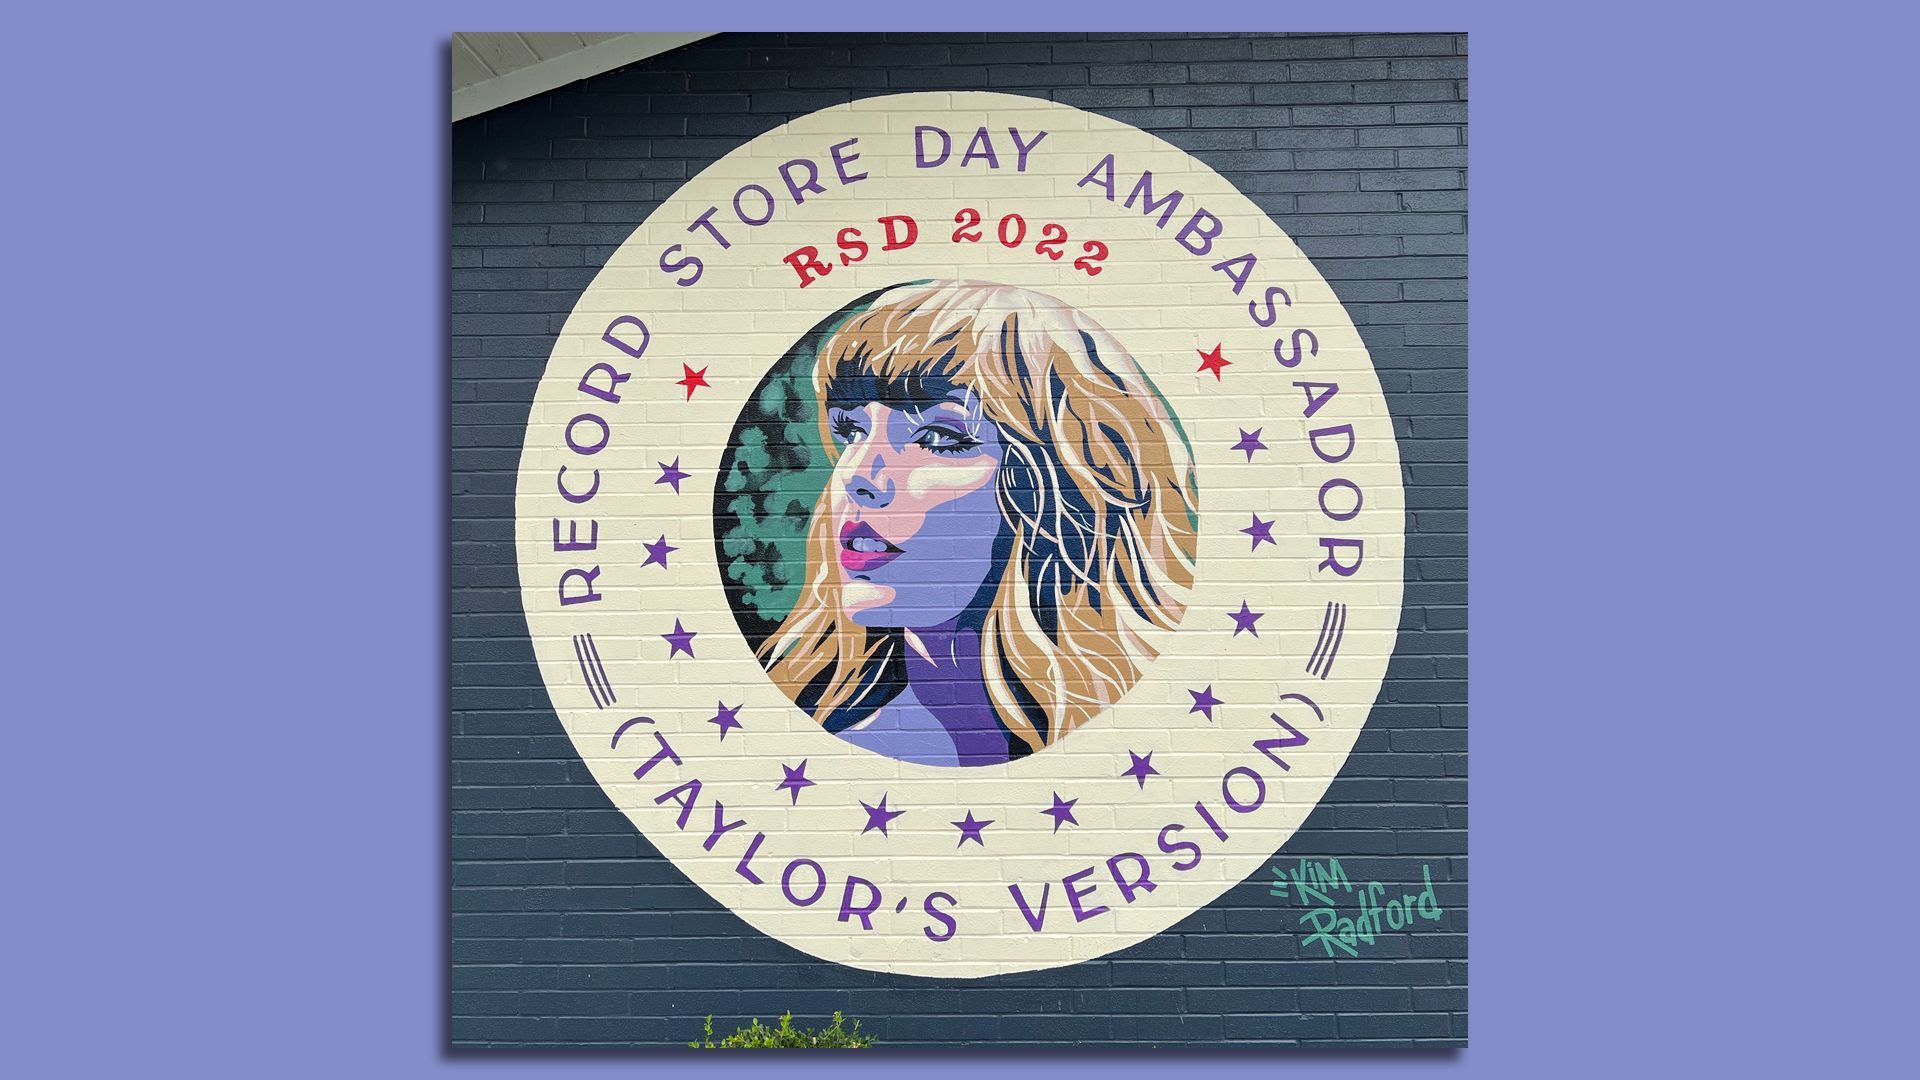 A mural of Taylor Swift on record store day